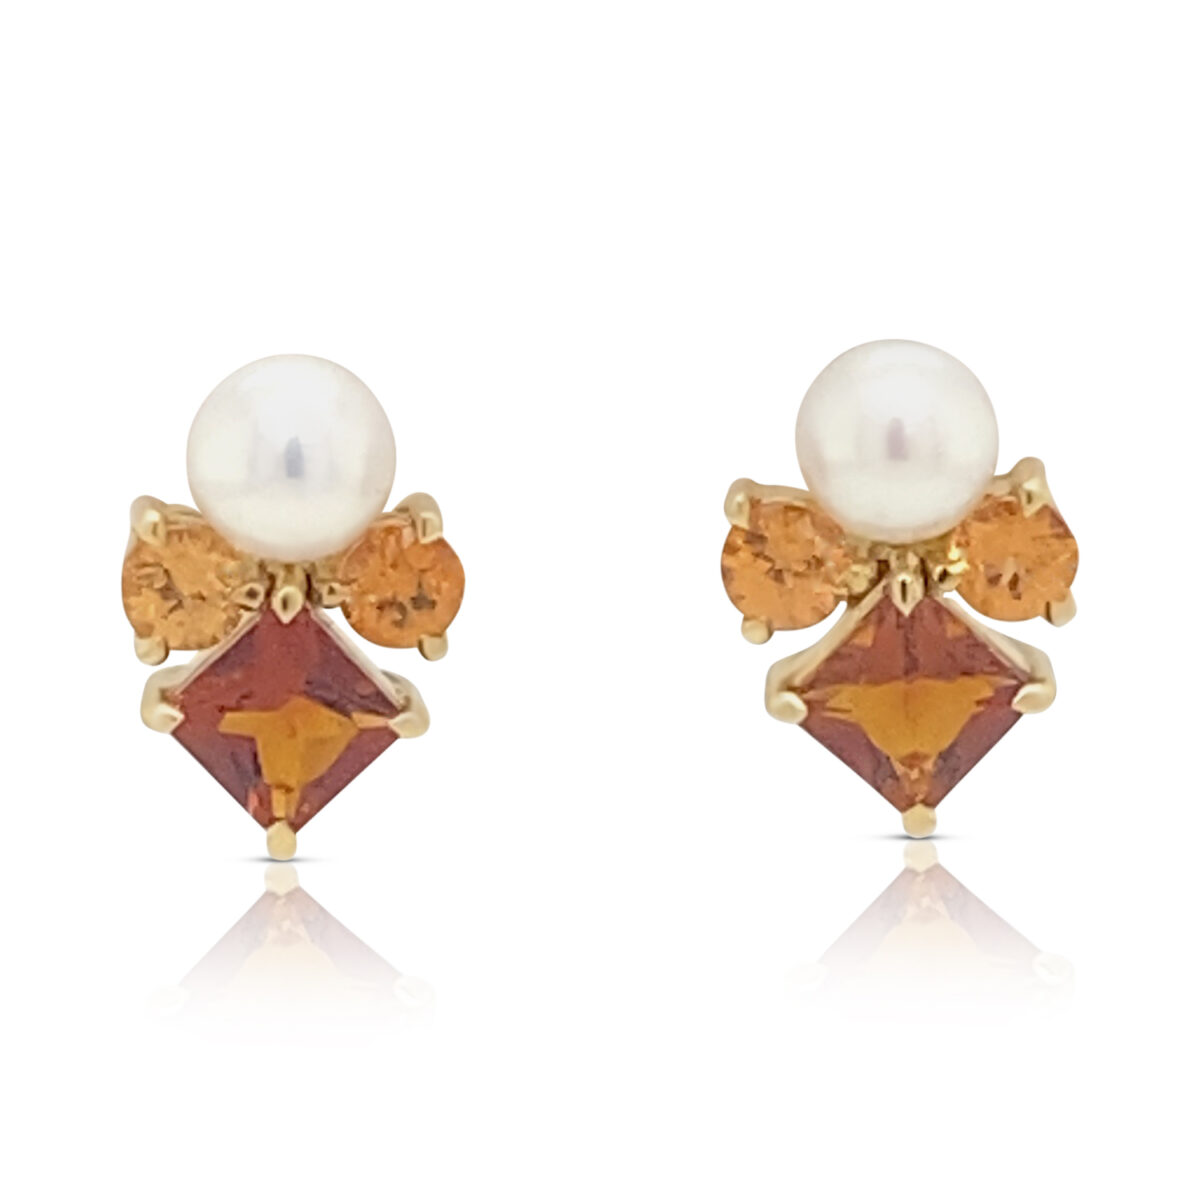 Seraphim earring with Citrine, Spessartine Garnet and Pearl in 18 kt yg